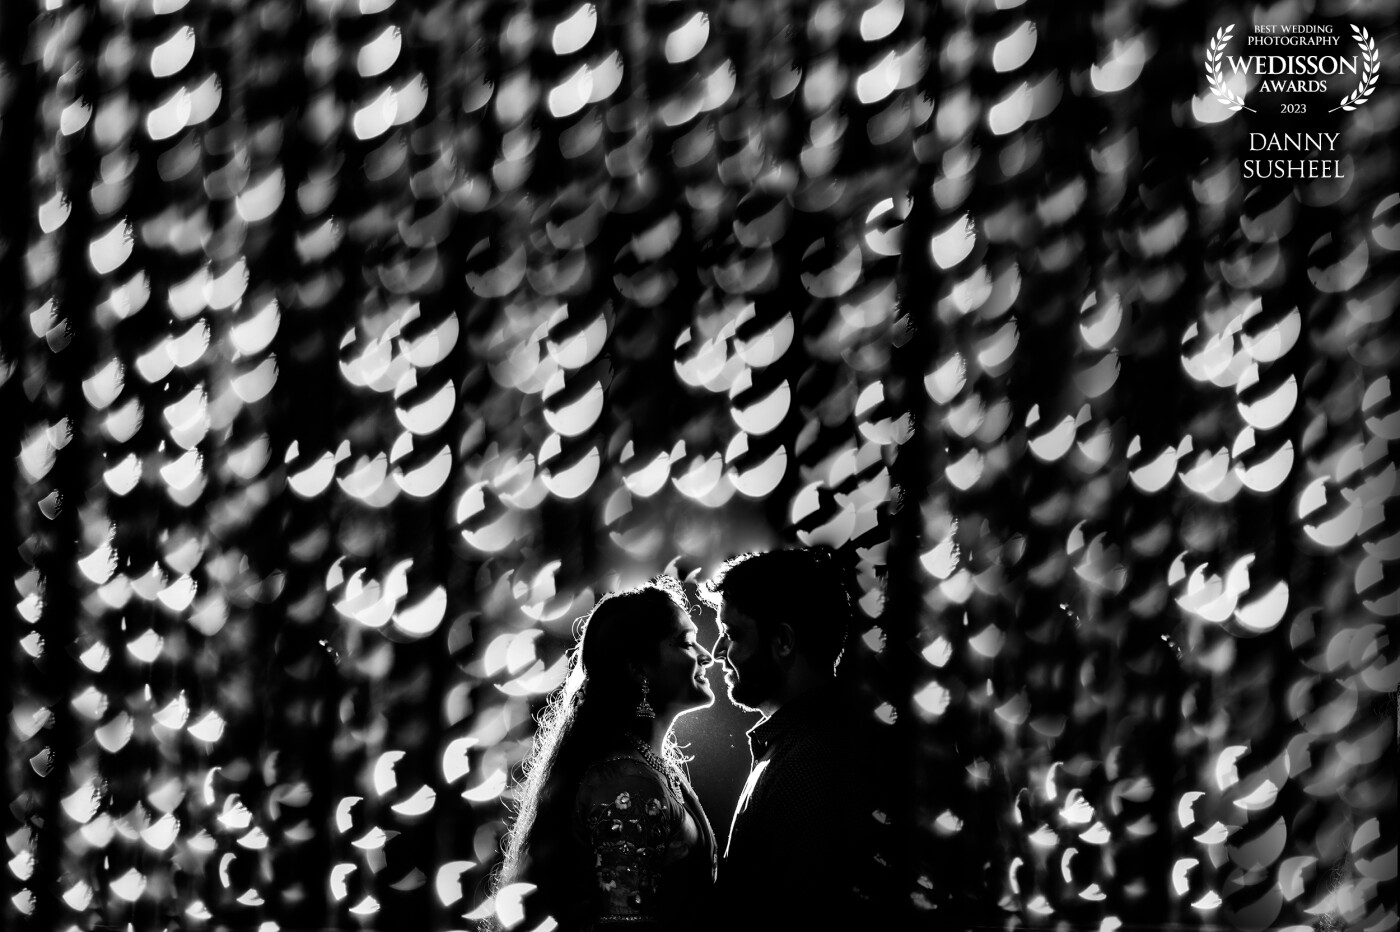 Amidst stunning bokeh, their noses unite in a magical moment where their hearts entwine and reveal pure affection.